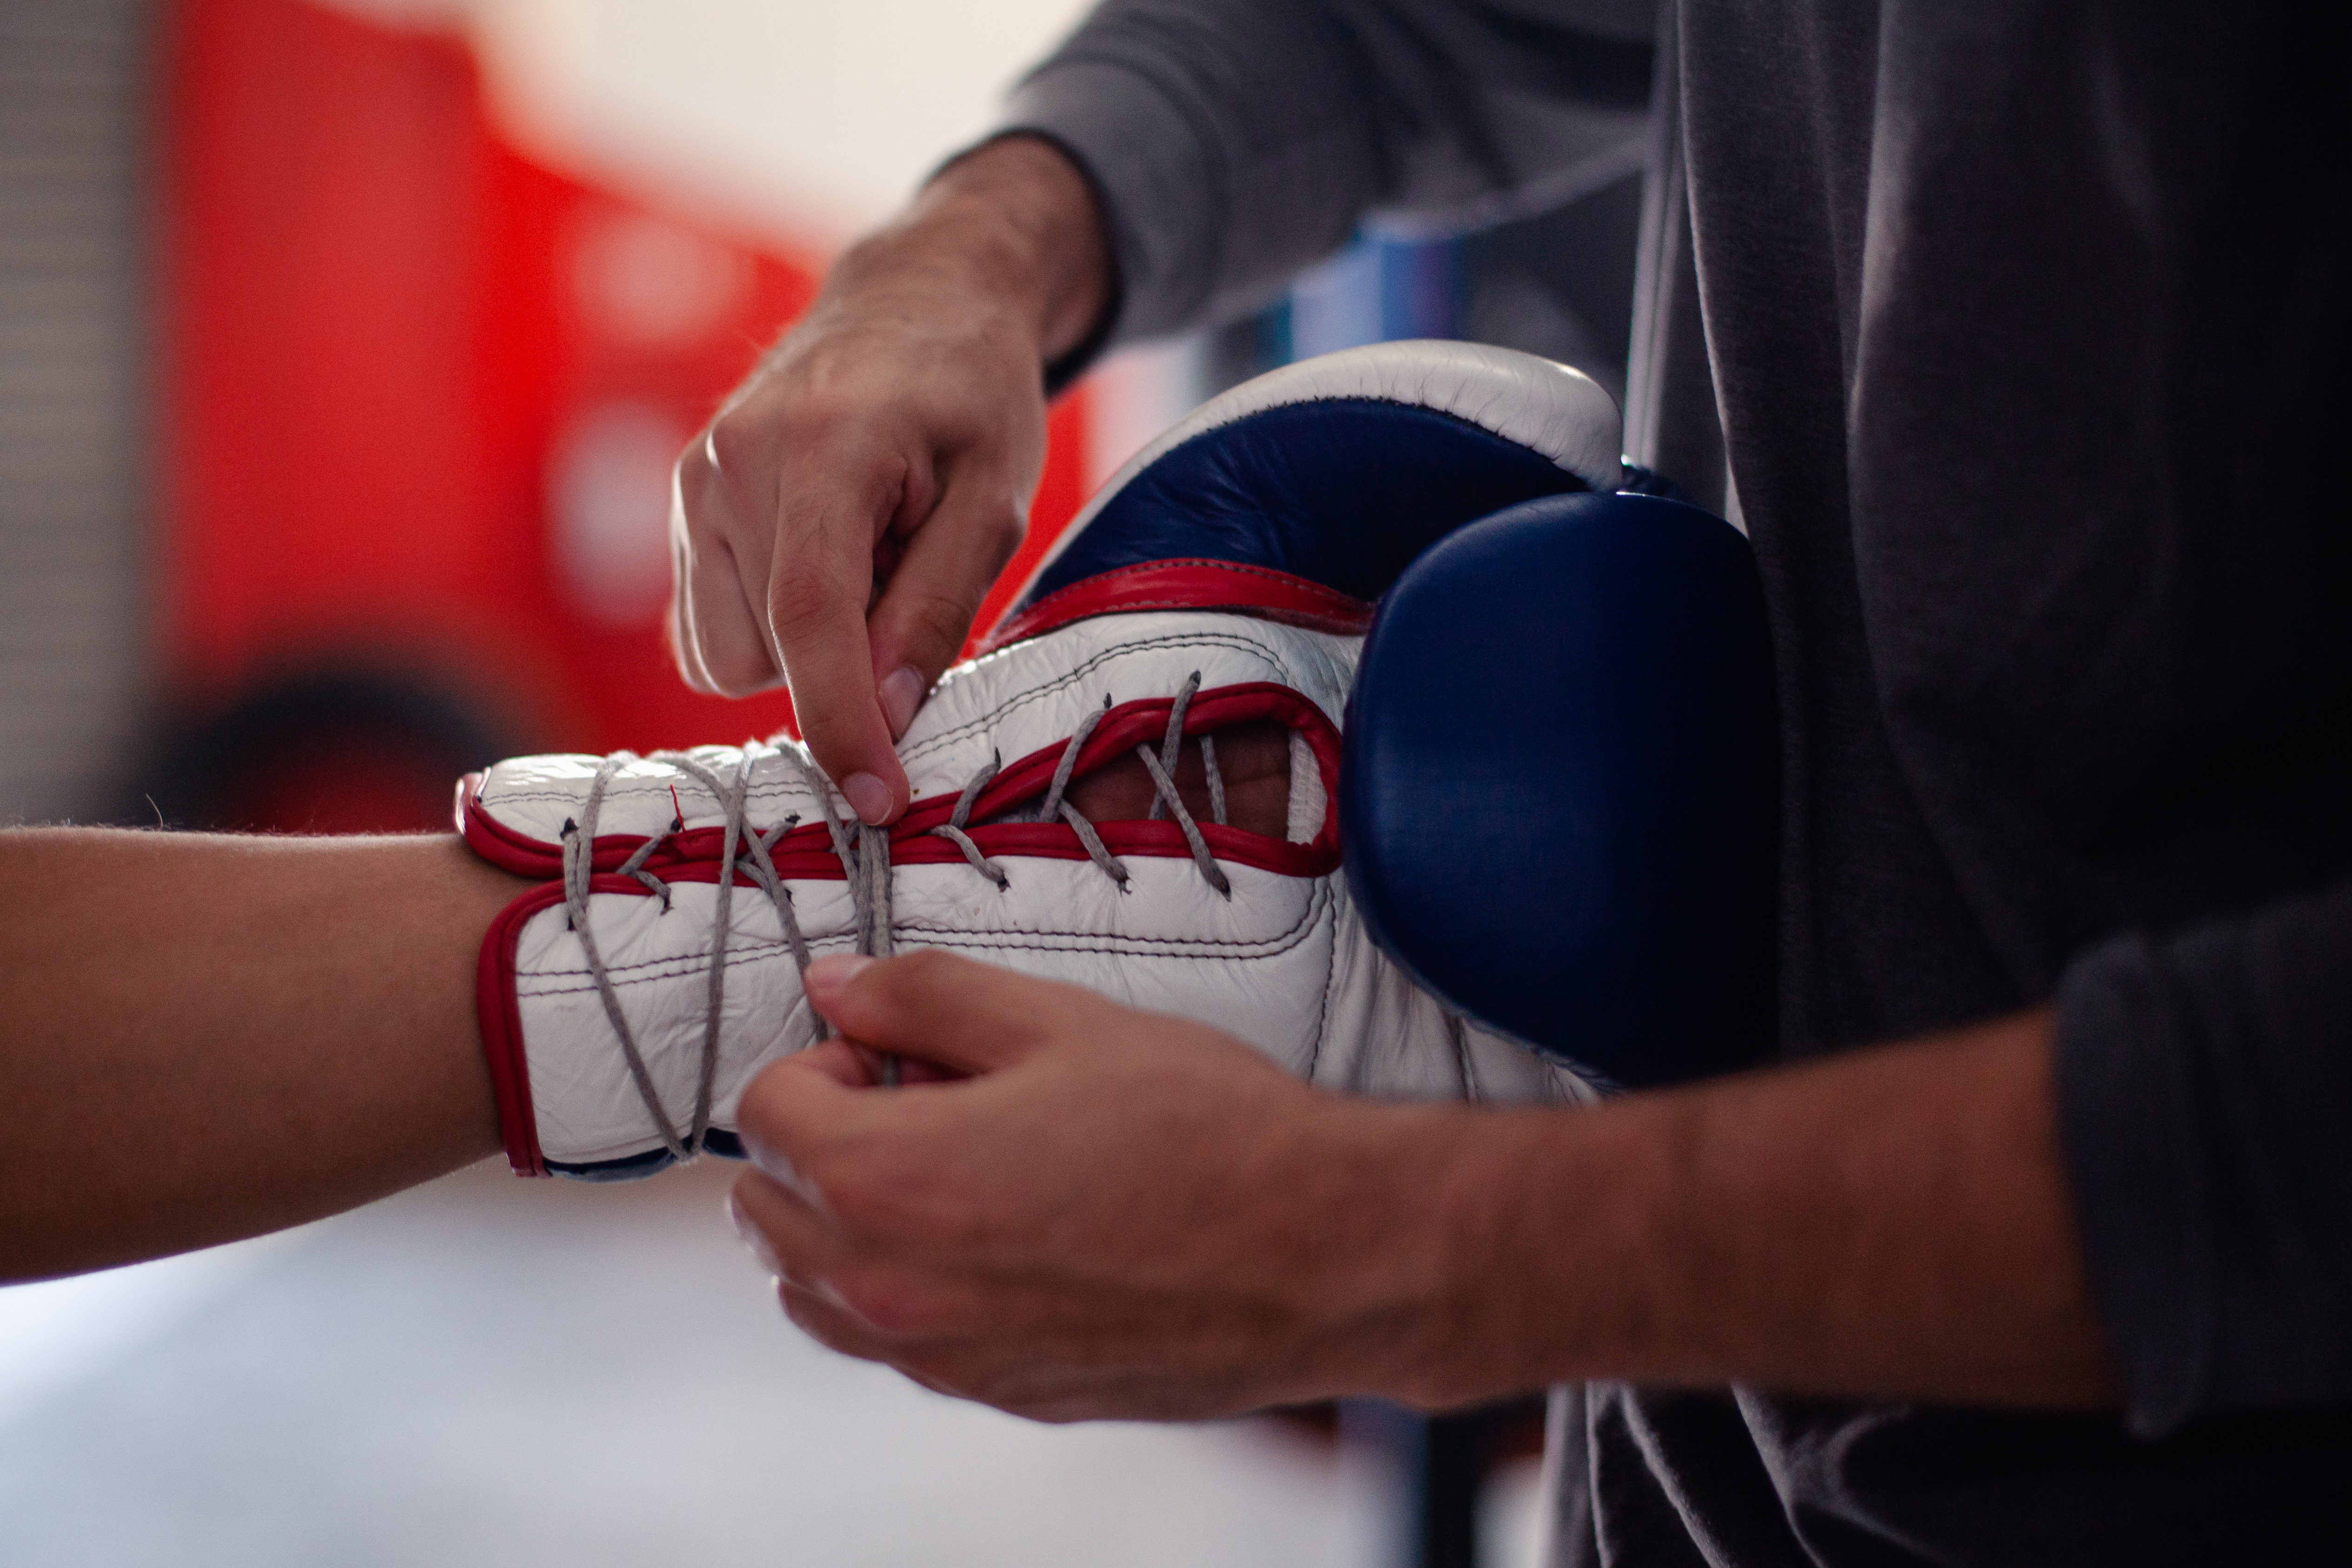 Where to Buy The Best Boxing Equipment